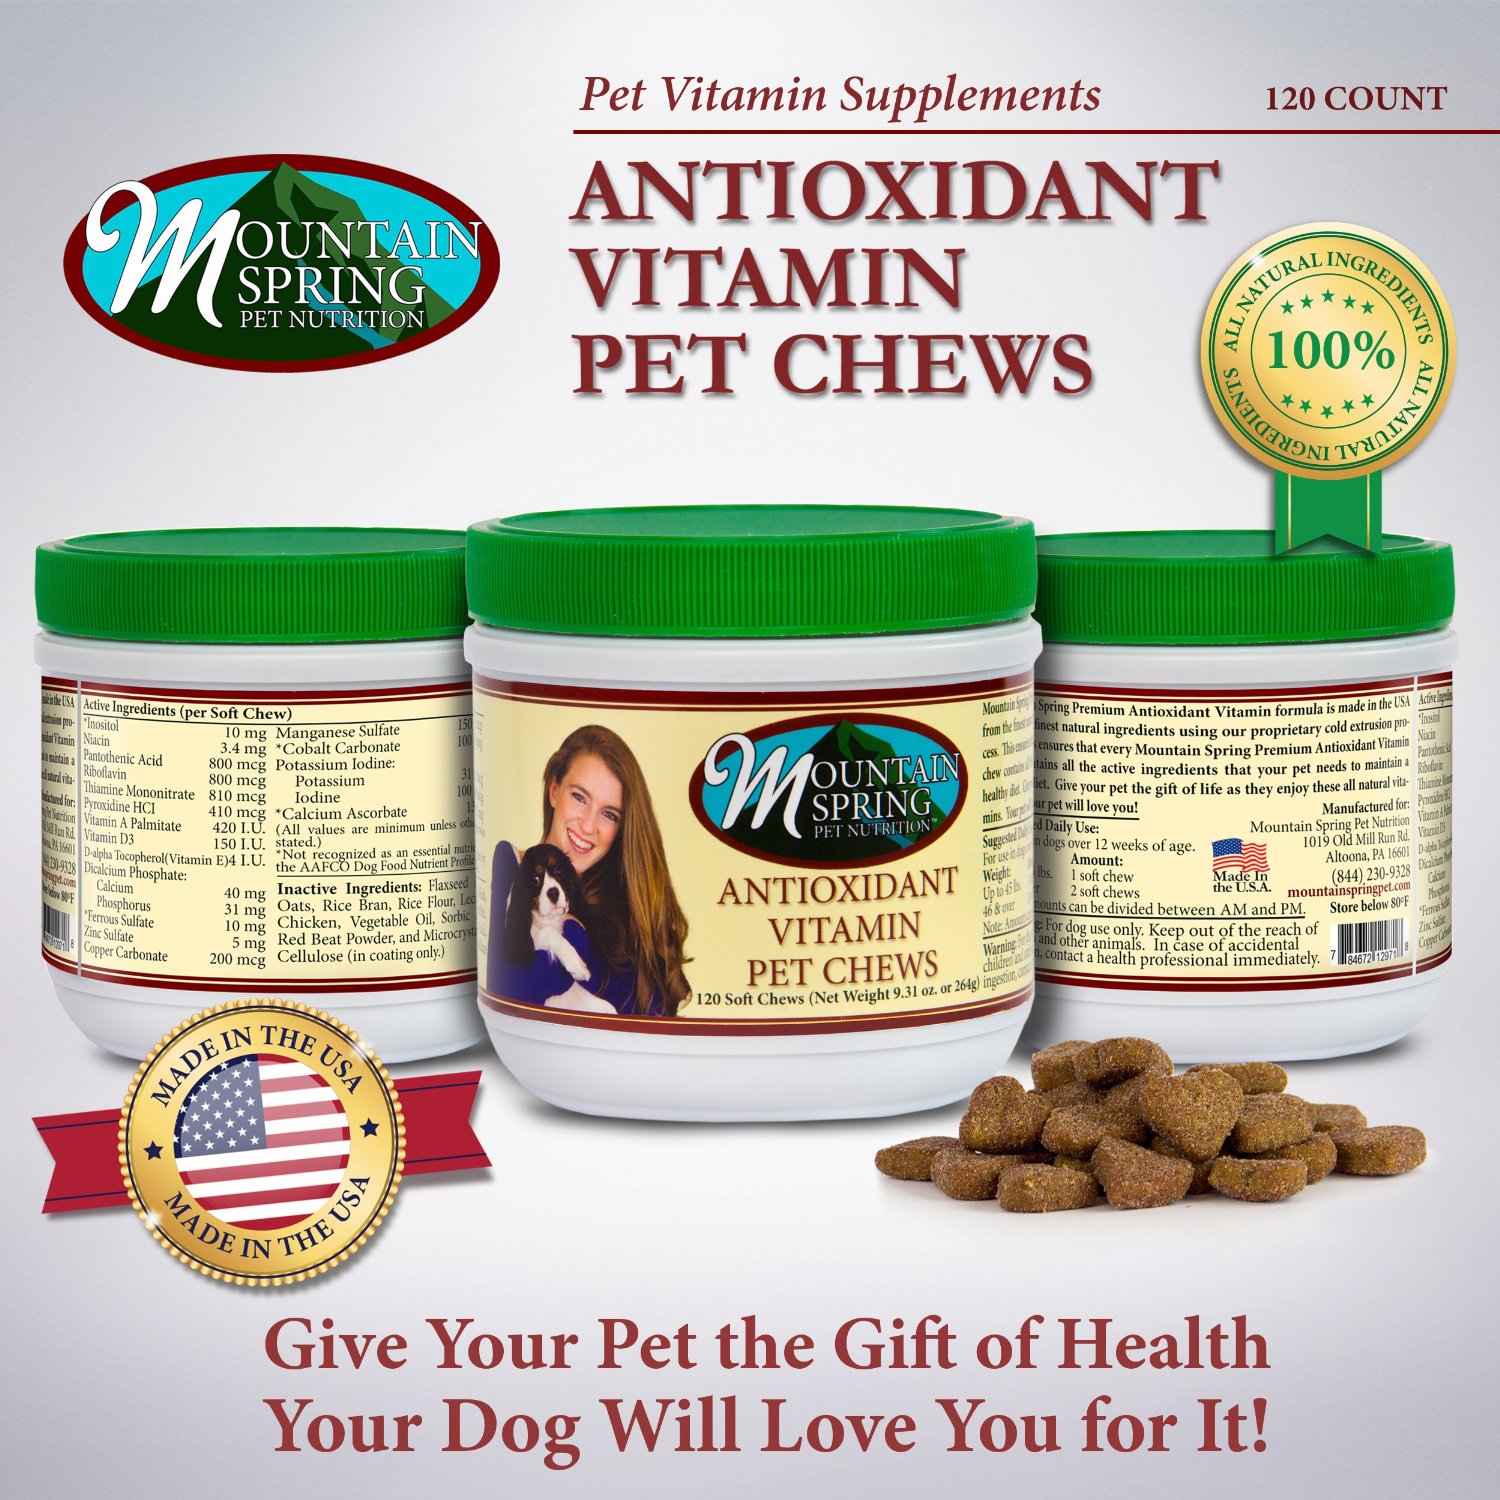 Give your pet the gift of health